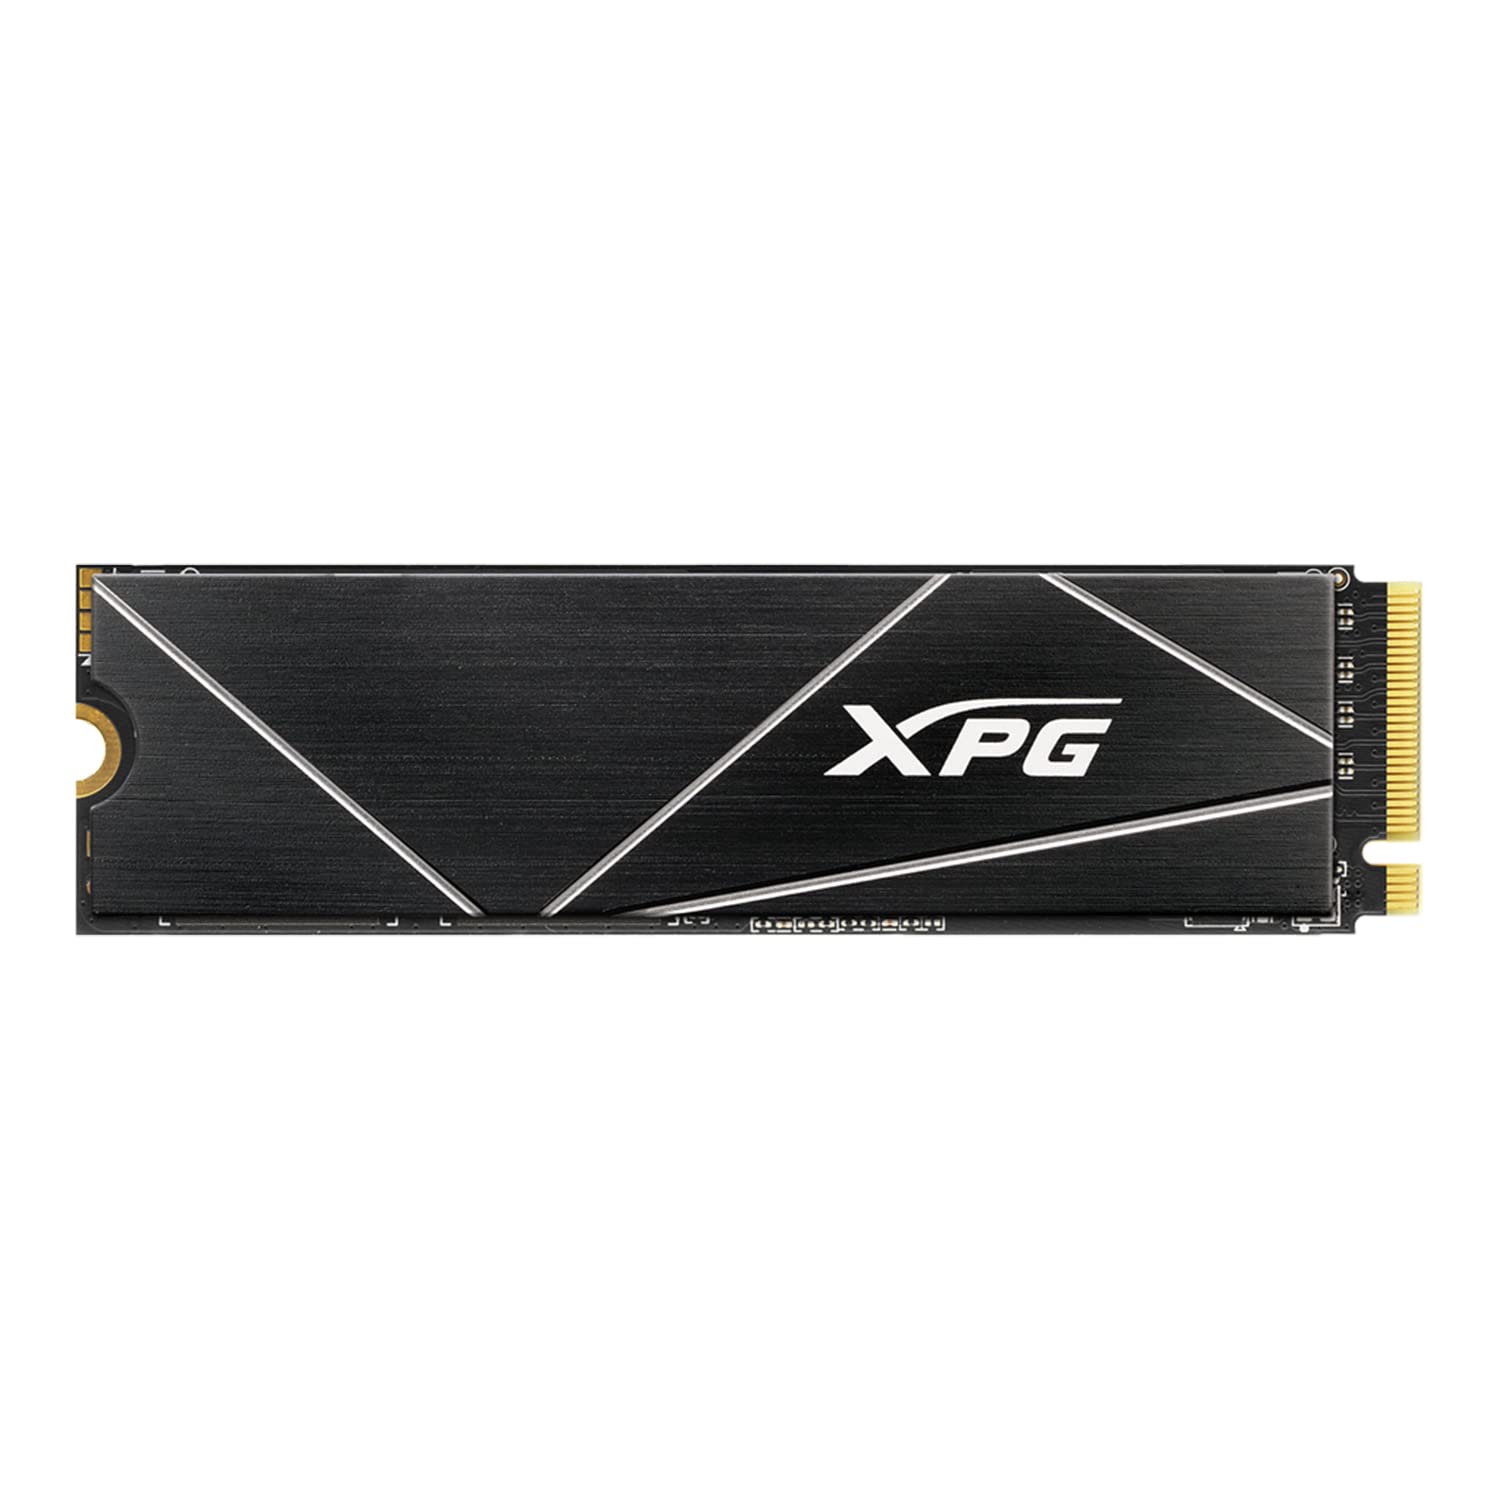 Amazon Lightning Deal: 2TB XPG GAMMIX S70 Blade PCIe Gen4 M.2 2280 PS5 Compatible Solid State Drive $91 + Free Shipping